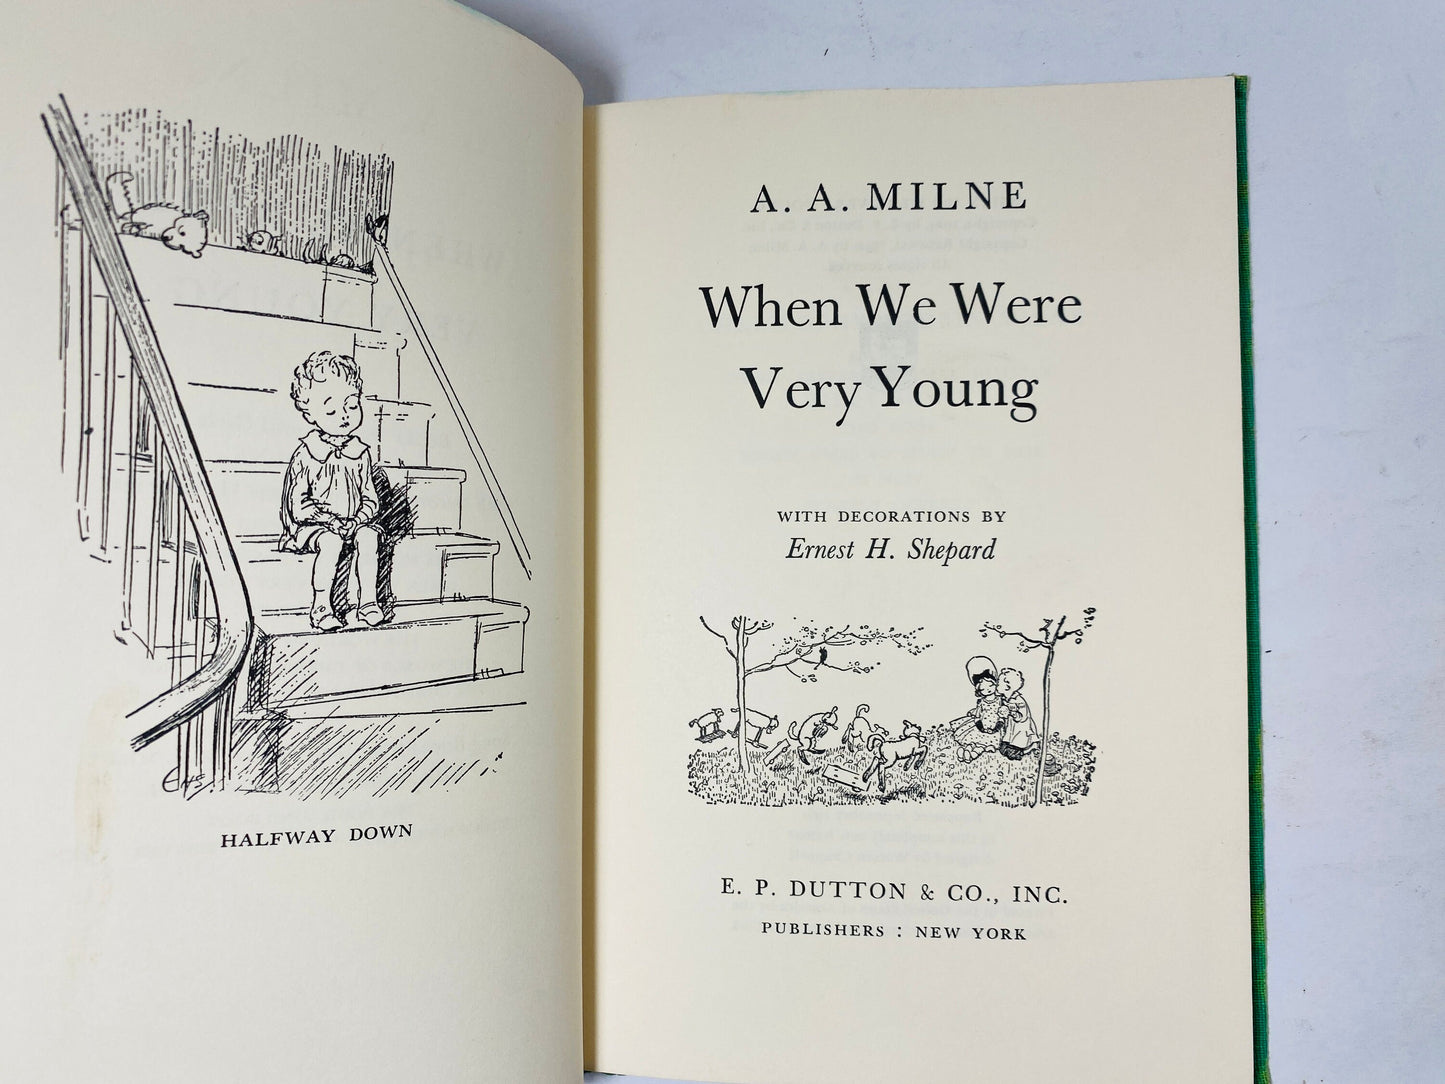 1961 Winnie the Pooh When We Were Very Young. House at Pooh Corner vintage book by AA Milne. Christopher Robin. Green cloth cover